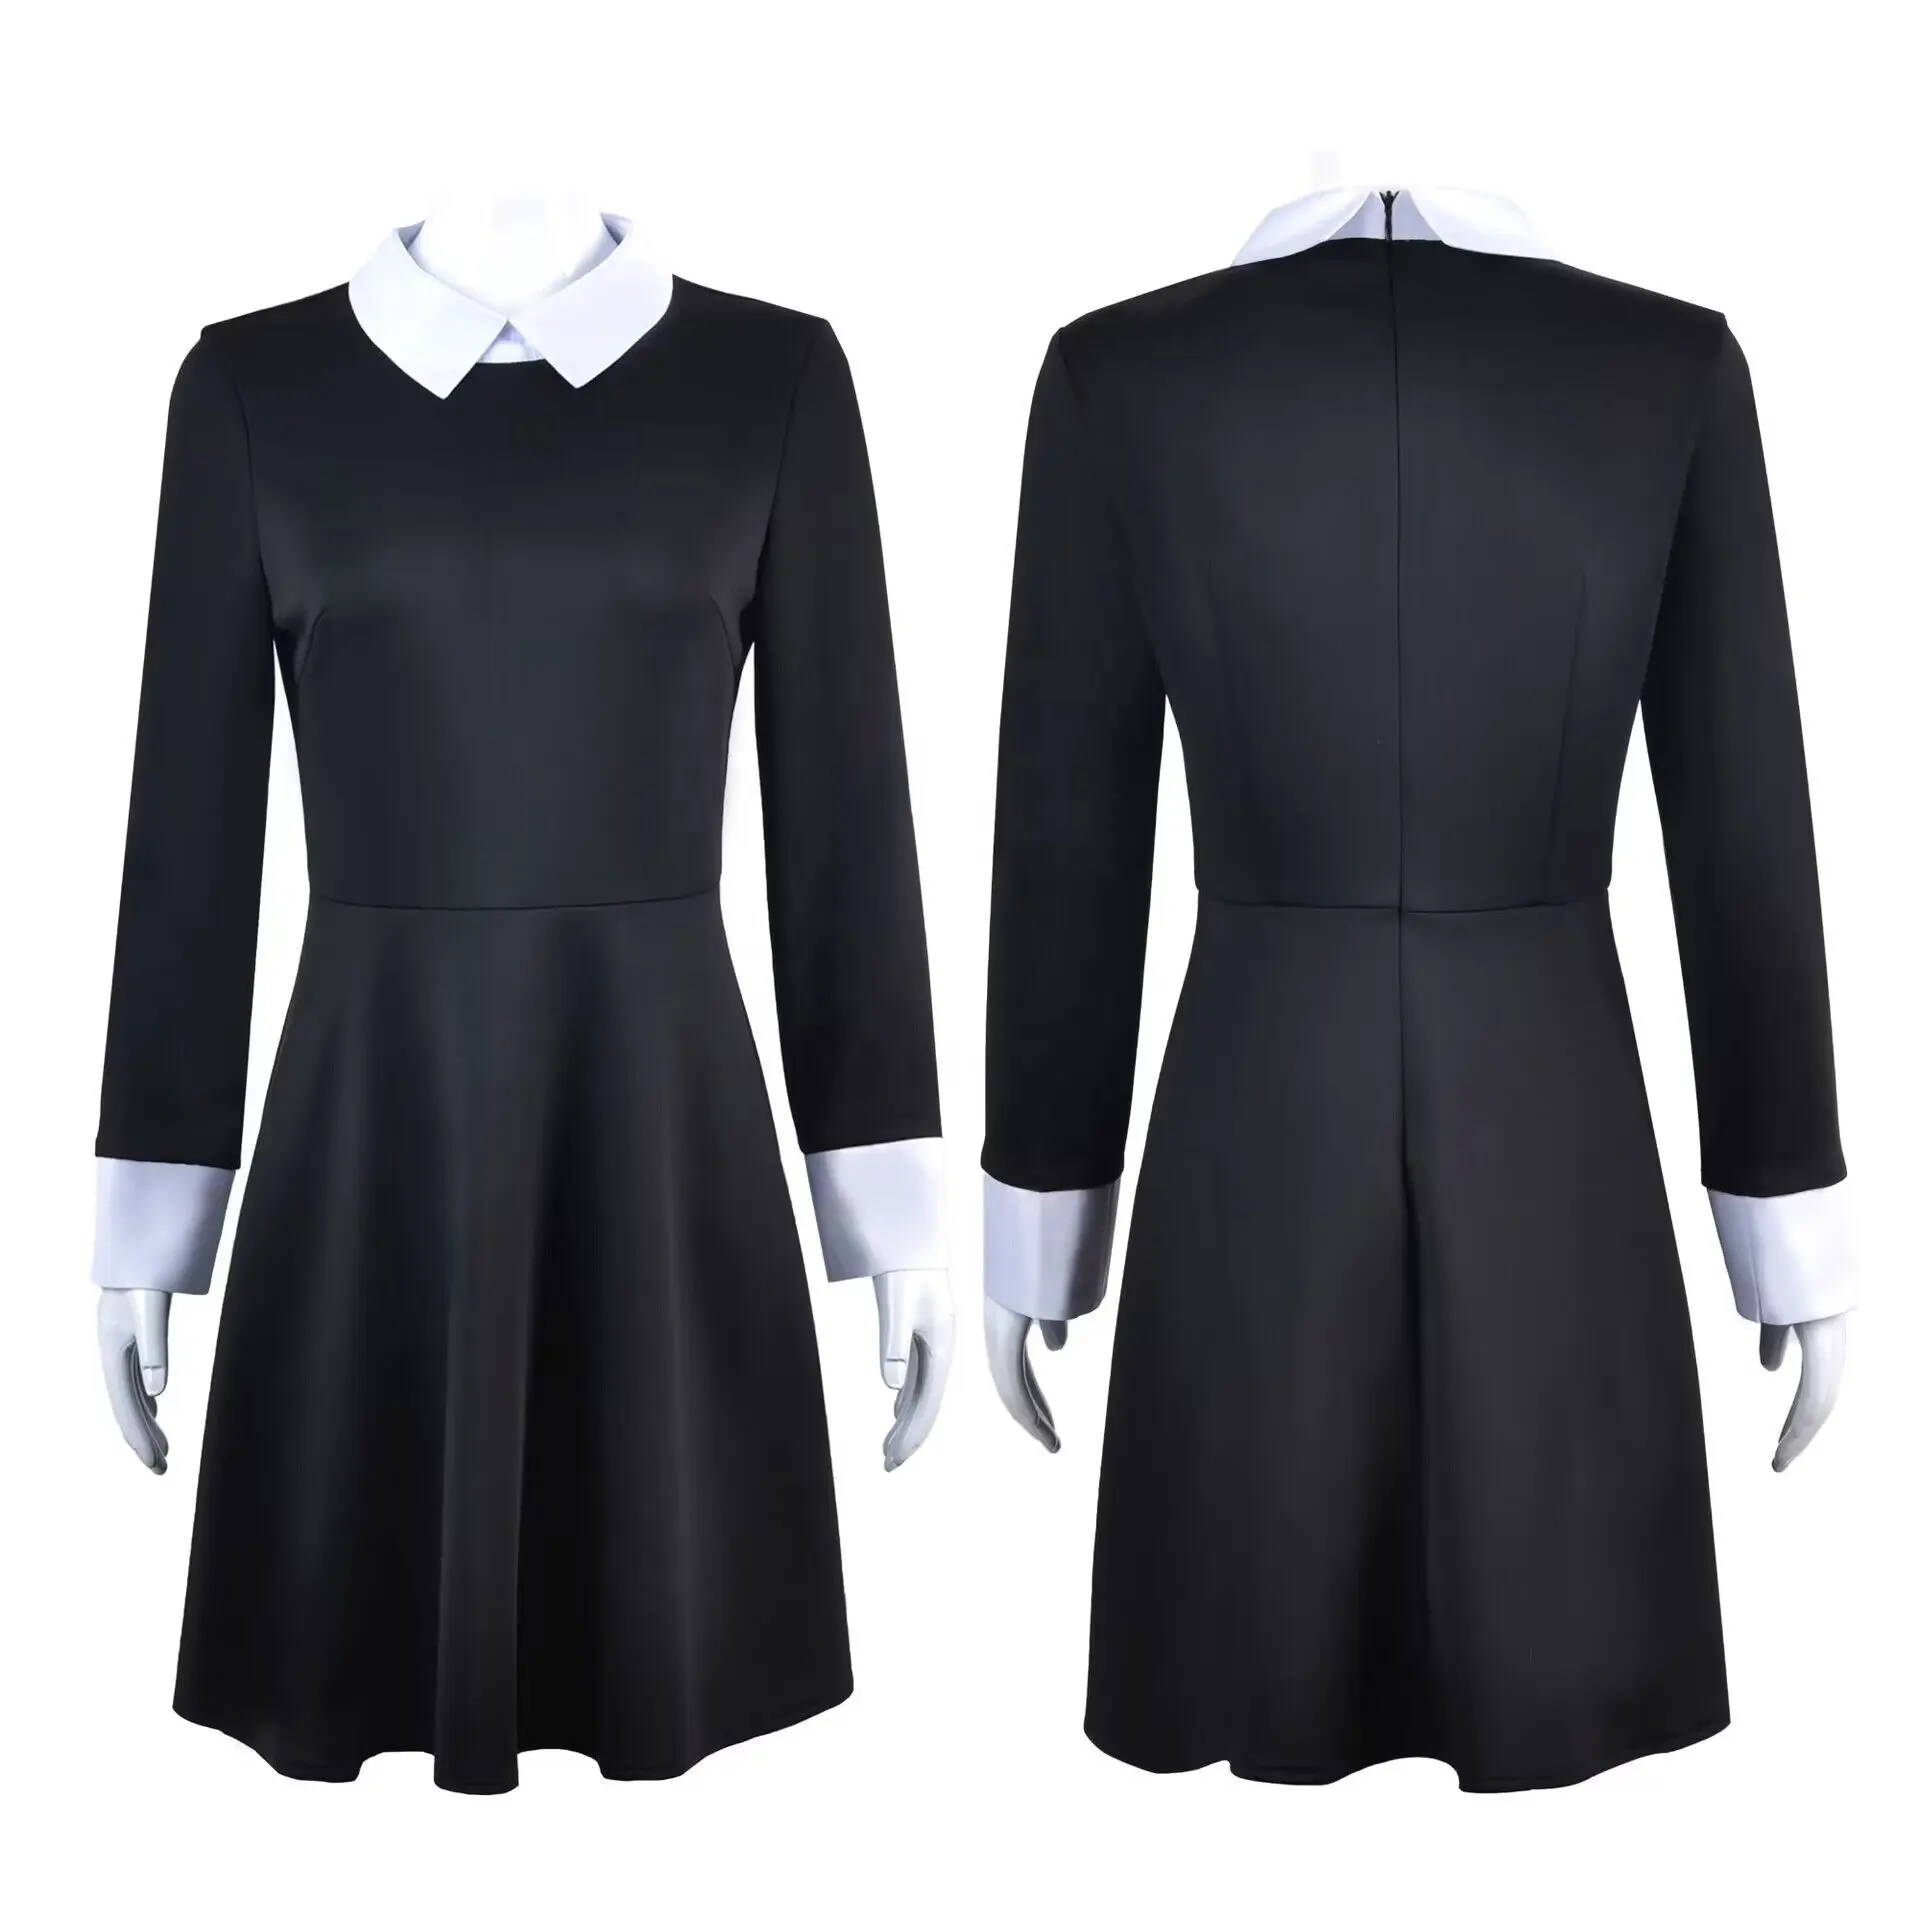 Black Dress Skirt Halloween Cosplay Outfit Clothes School Dance Costume M-177